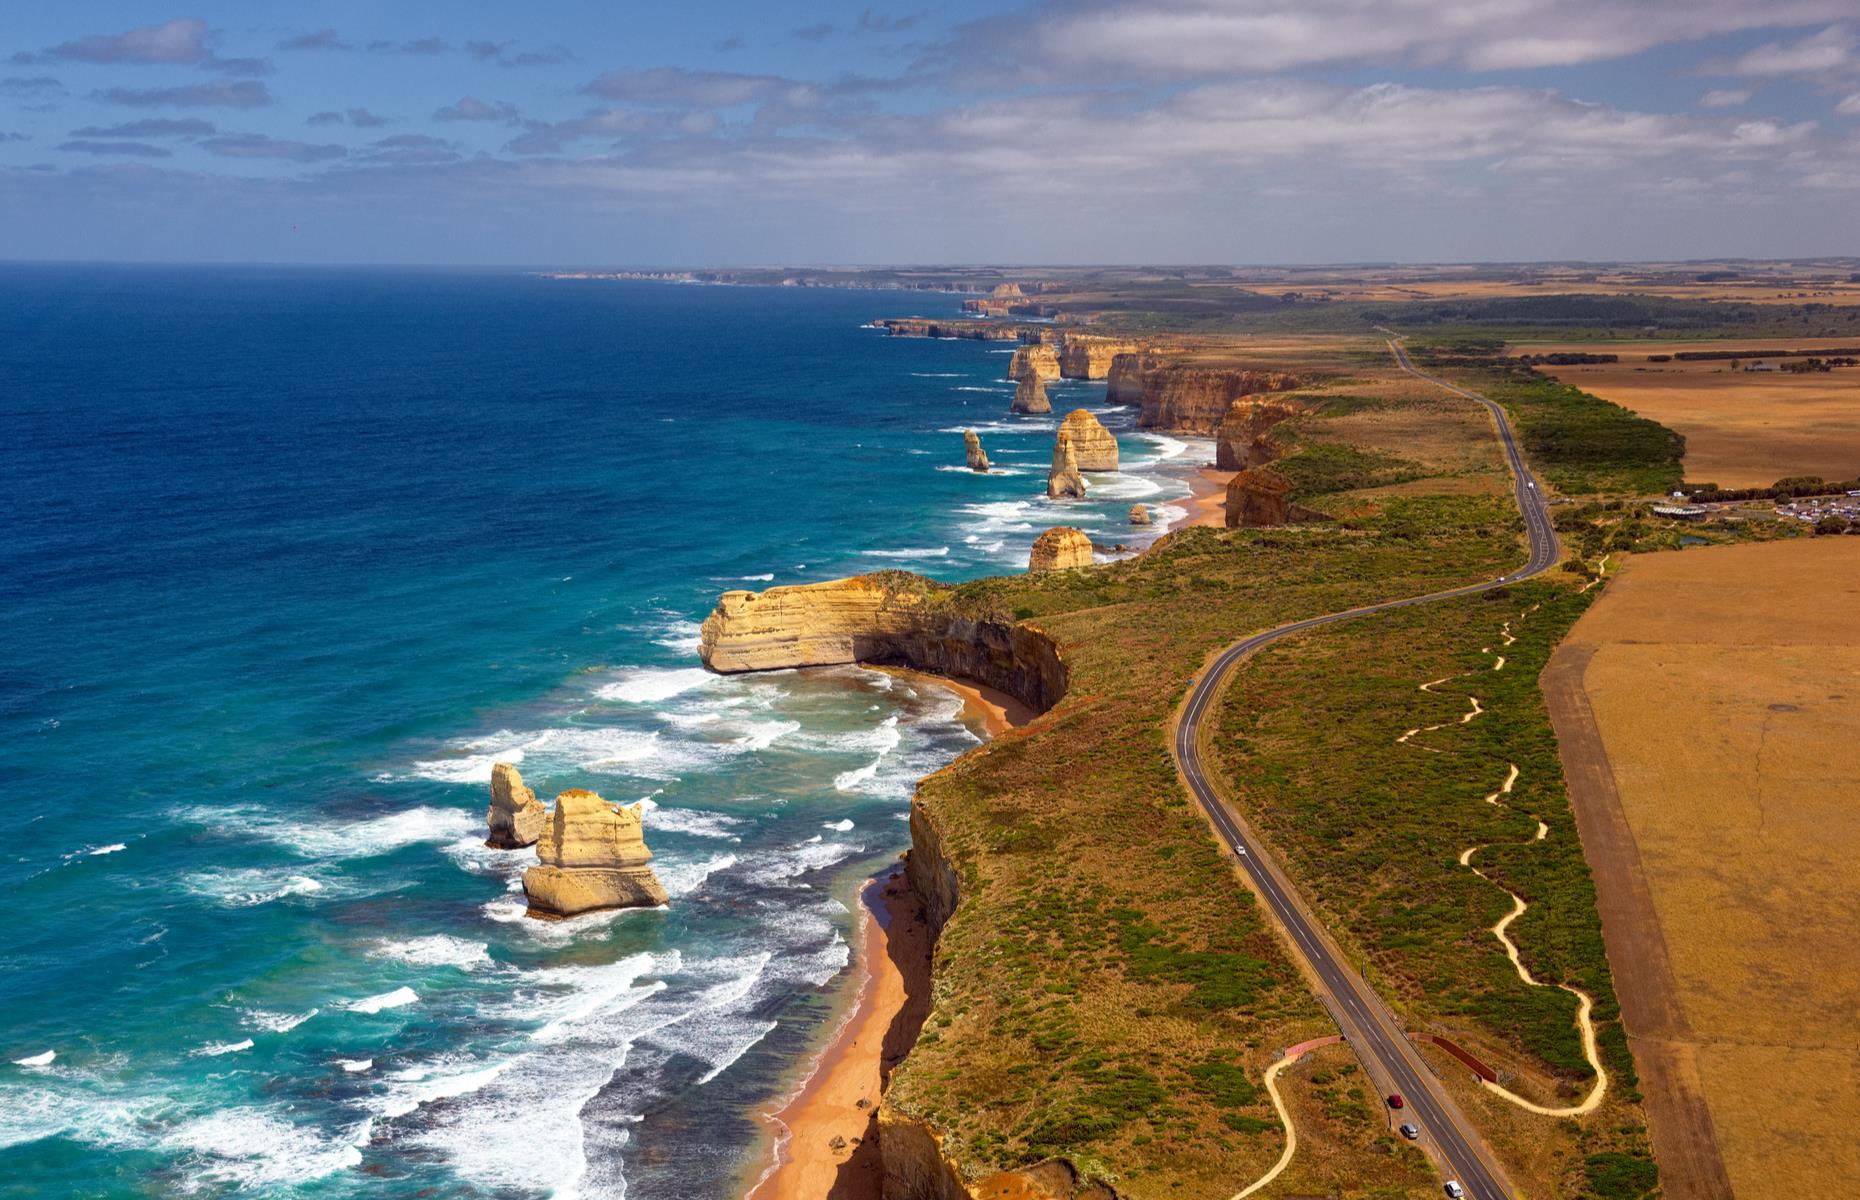 <p>Arguably Australia's most famous drive, the Great Ocean Road in Victoria is everything its name promises: soaring ocean vistas, sheer cliffs, and near-deserted surf beaches. The 151-mile-long (243km) road goes from Torquay in the east to Allansford and it was constructed along the storm-ravaged coast in the 1920s by Australian servicemen who returned from the First World War and is officially the world's largest war memorial. Its most famous feature is the Twelve Apostles, a striking rock formation.</p>